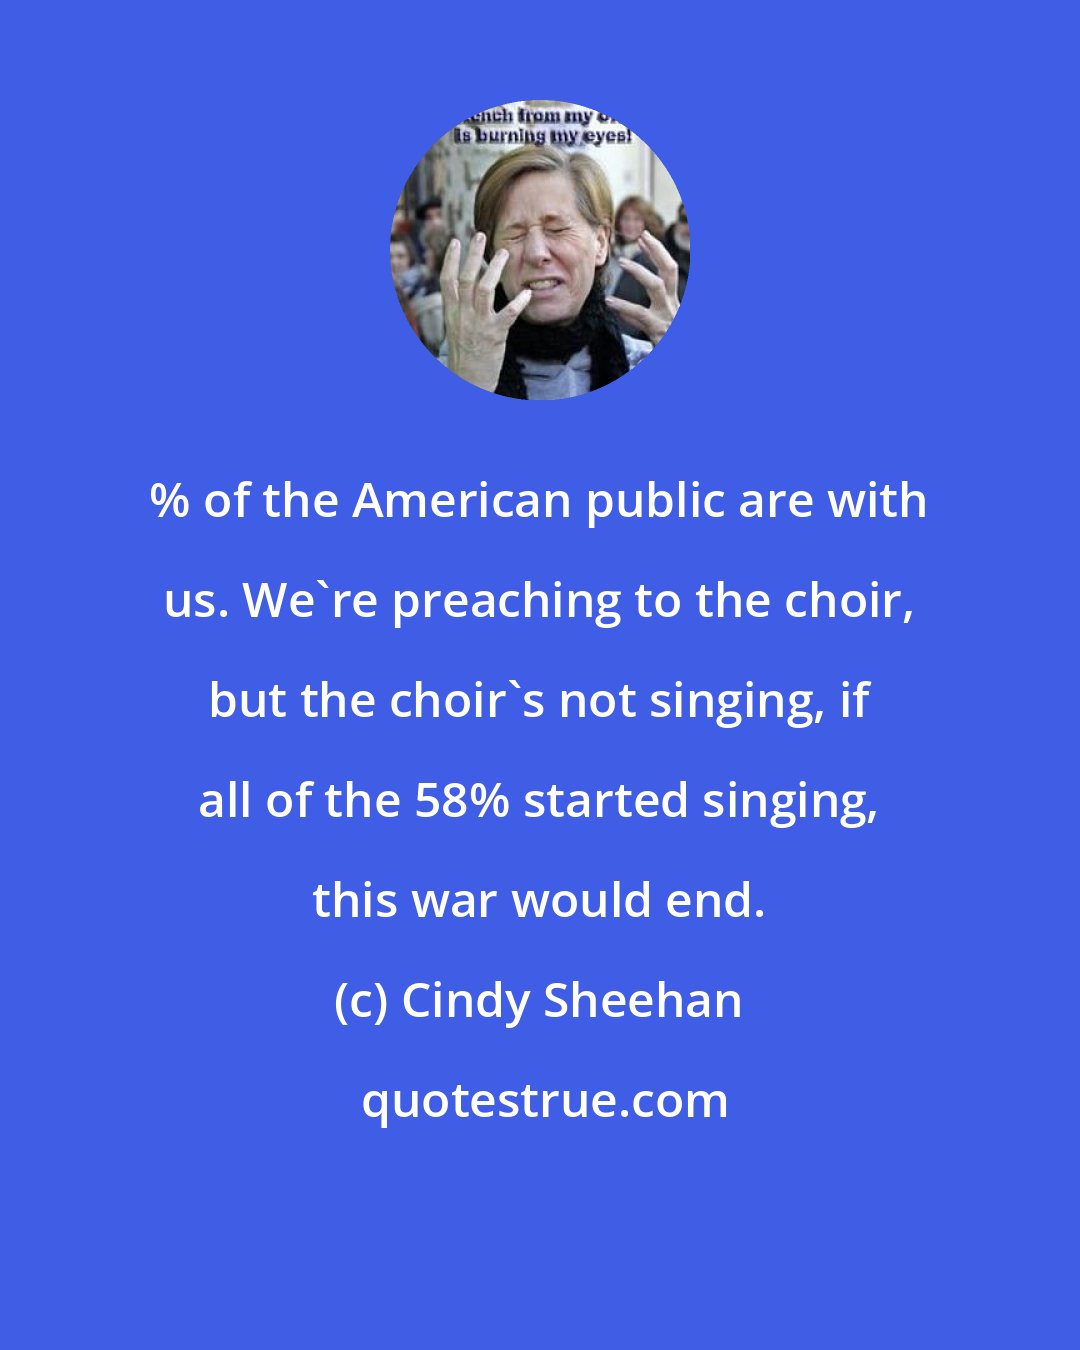 Cindy Sheehan: % of the American public are with us. We're preaching to the choir, but the choir's not singing, if all of the 58% started singing, this war would end.